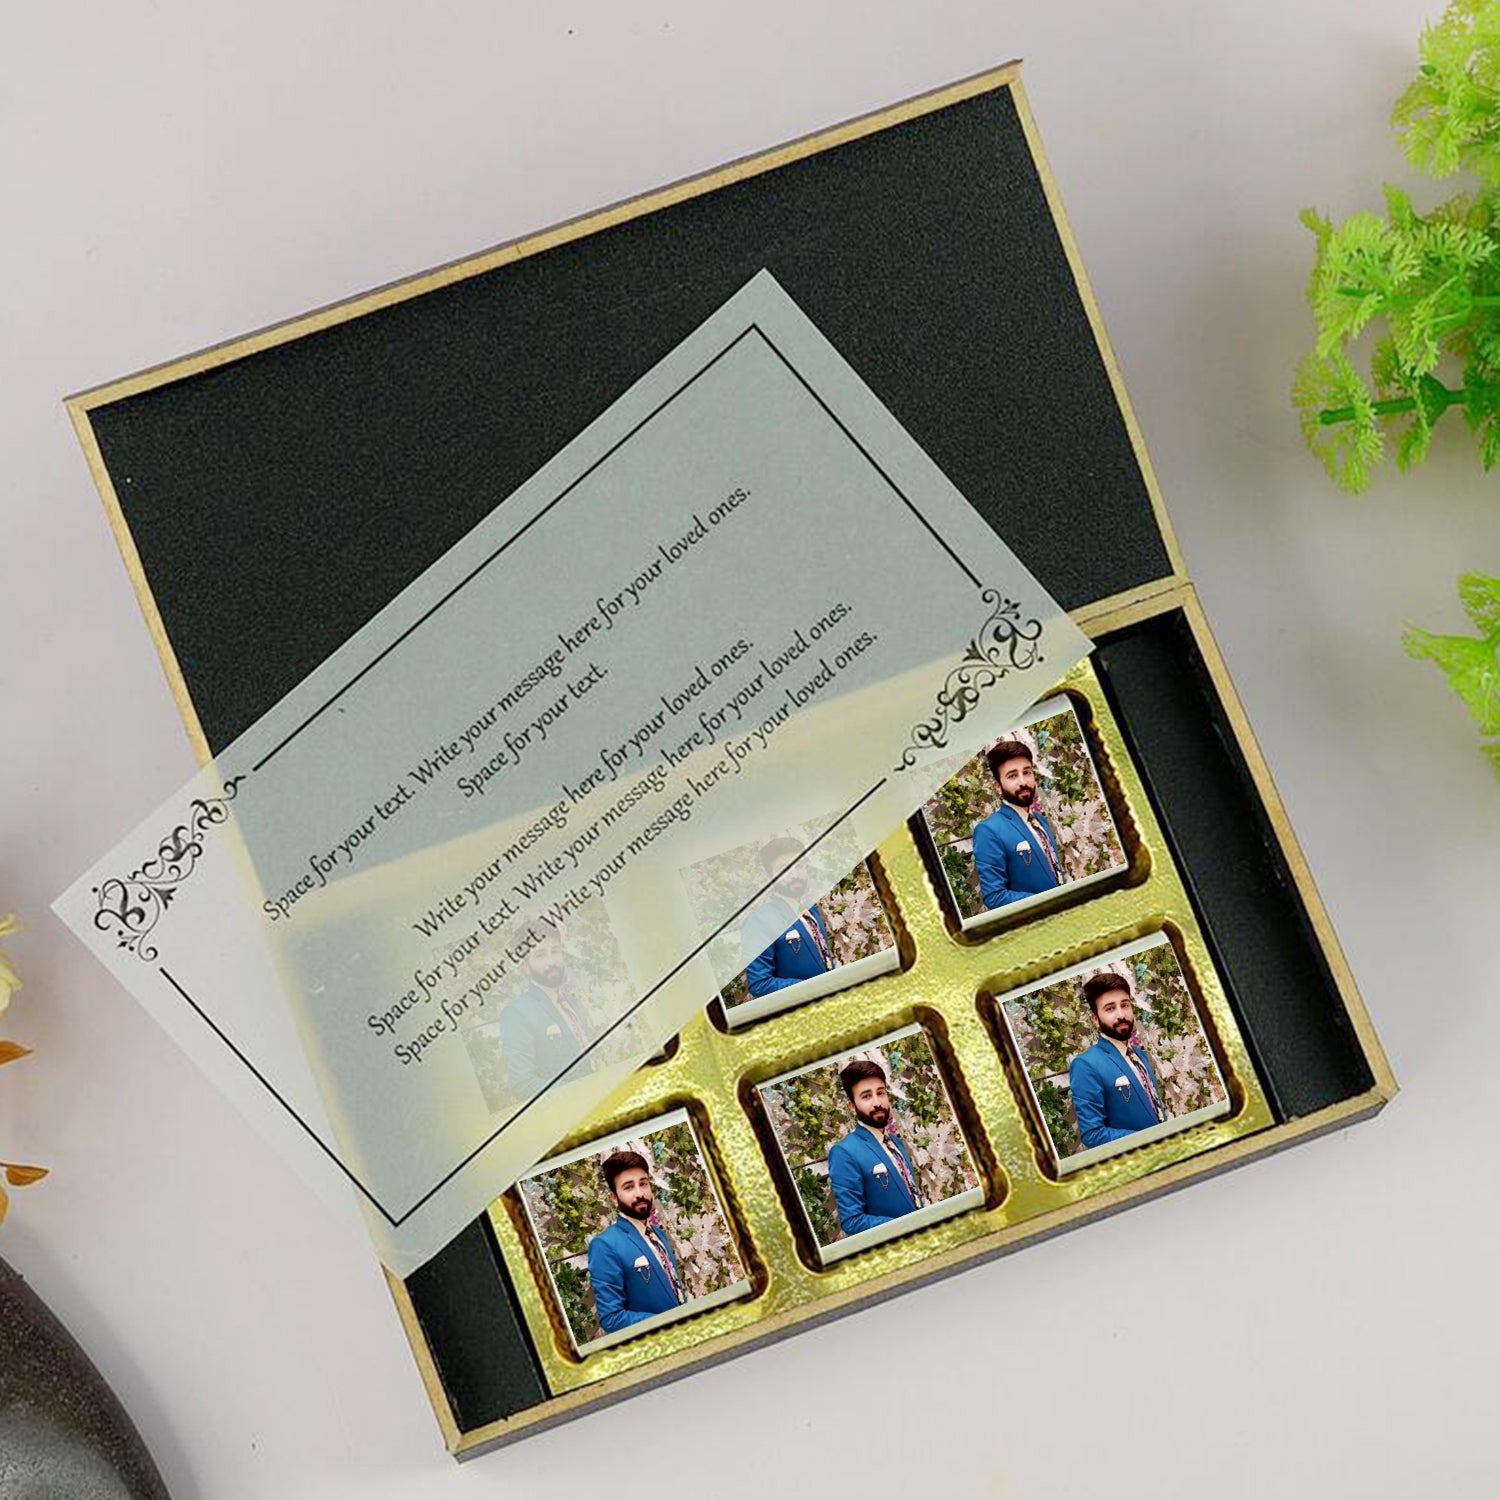 GIFT UNIQUE CUSTOMIZED CHOCOLATES BOX WITH SPECIAL MESSAGE. Chocolate Box Affortdable Price.